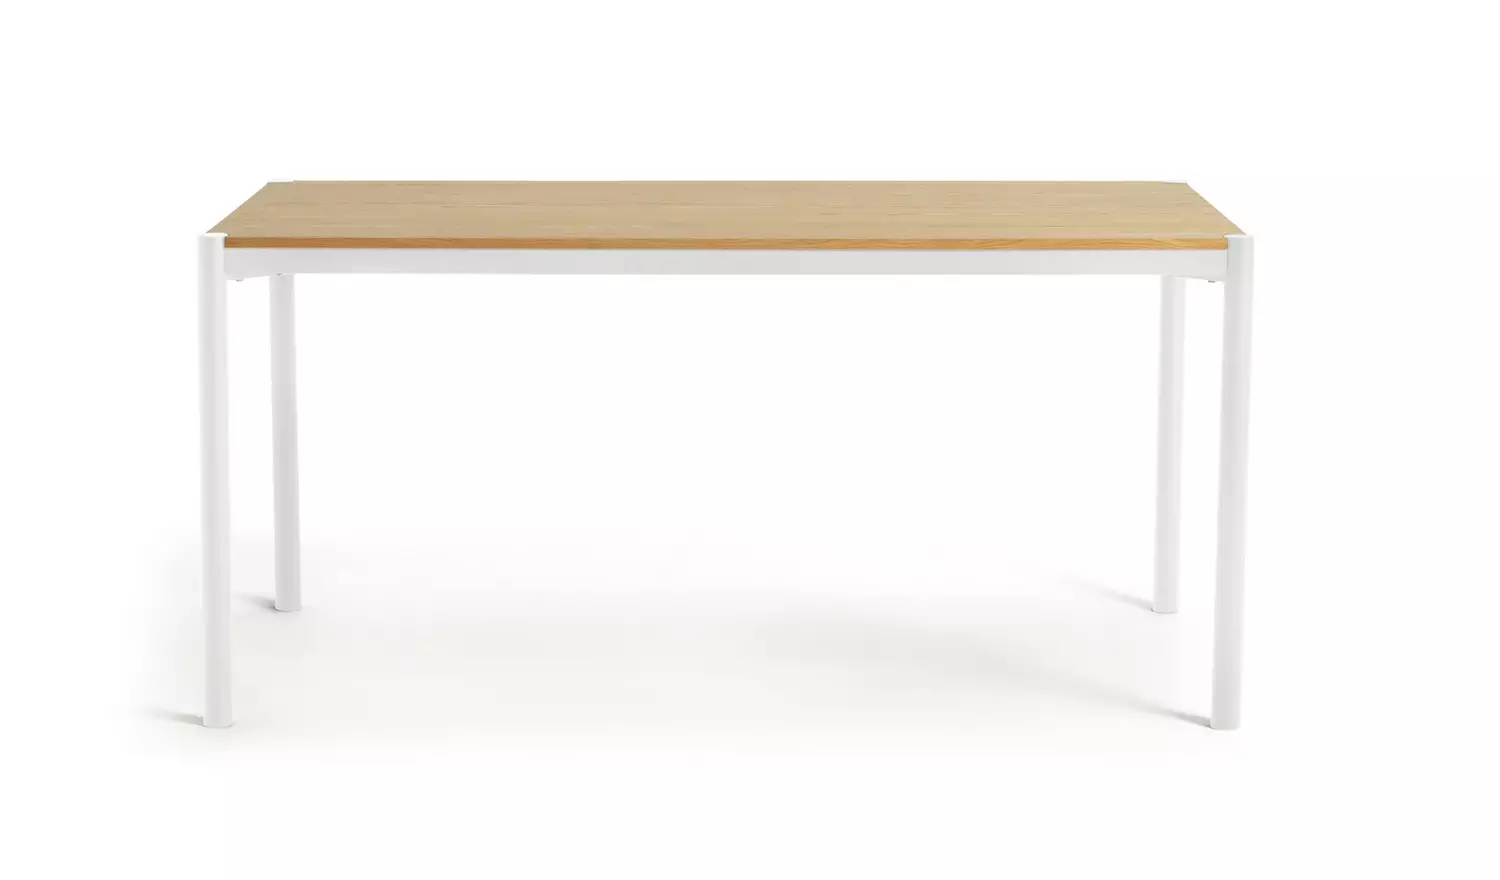 Caleb Wood 4 Seater Dining Table - White/Oak